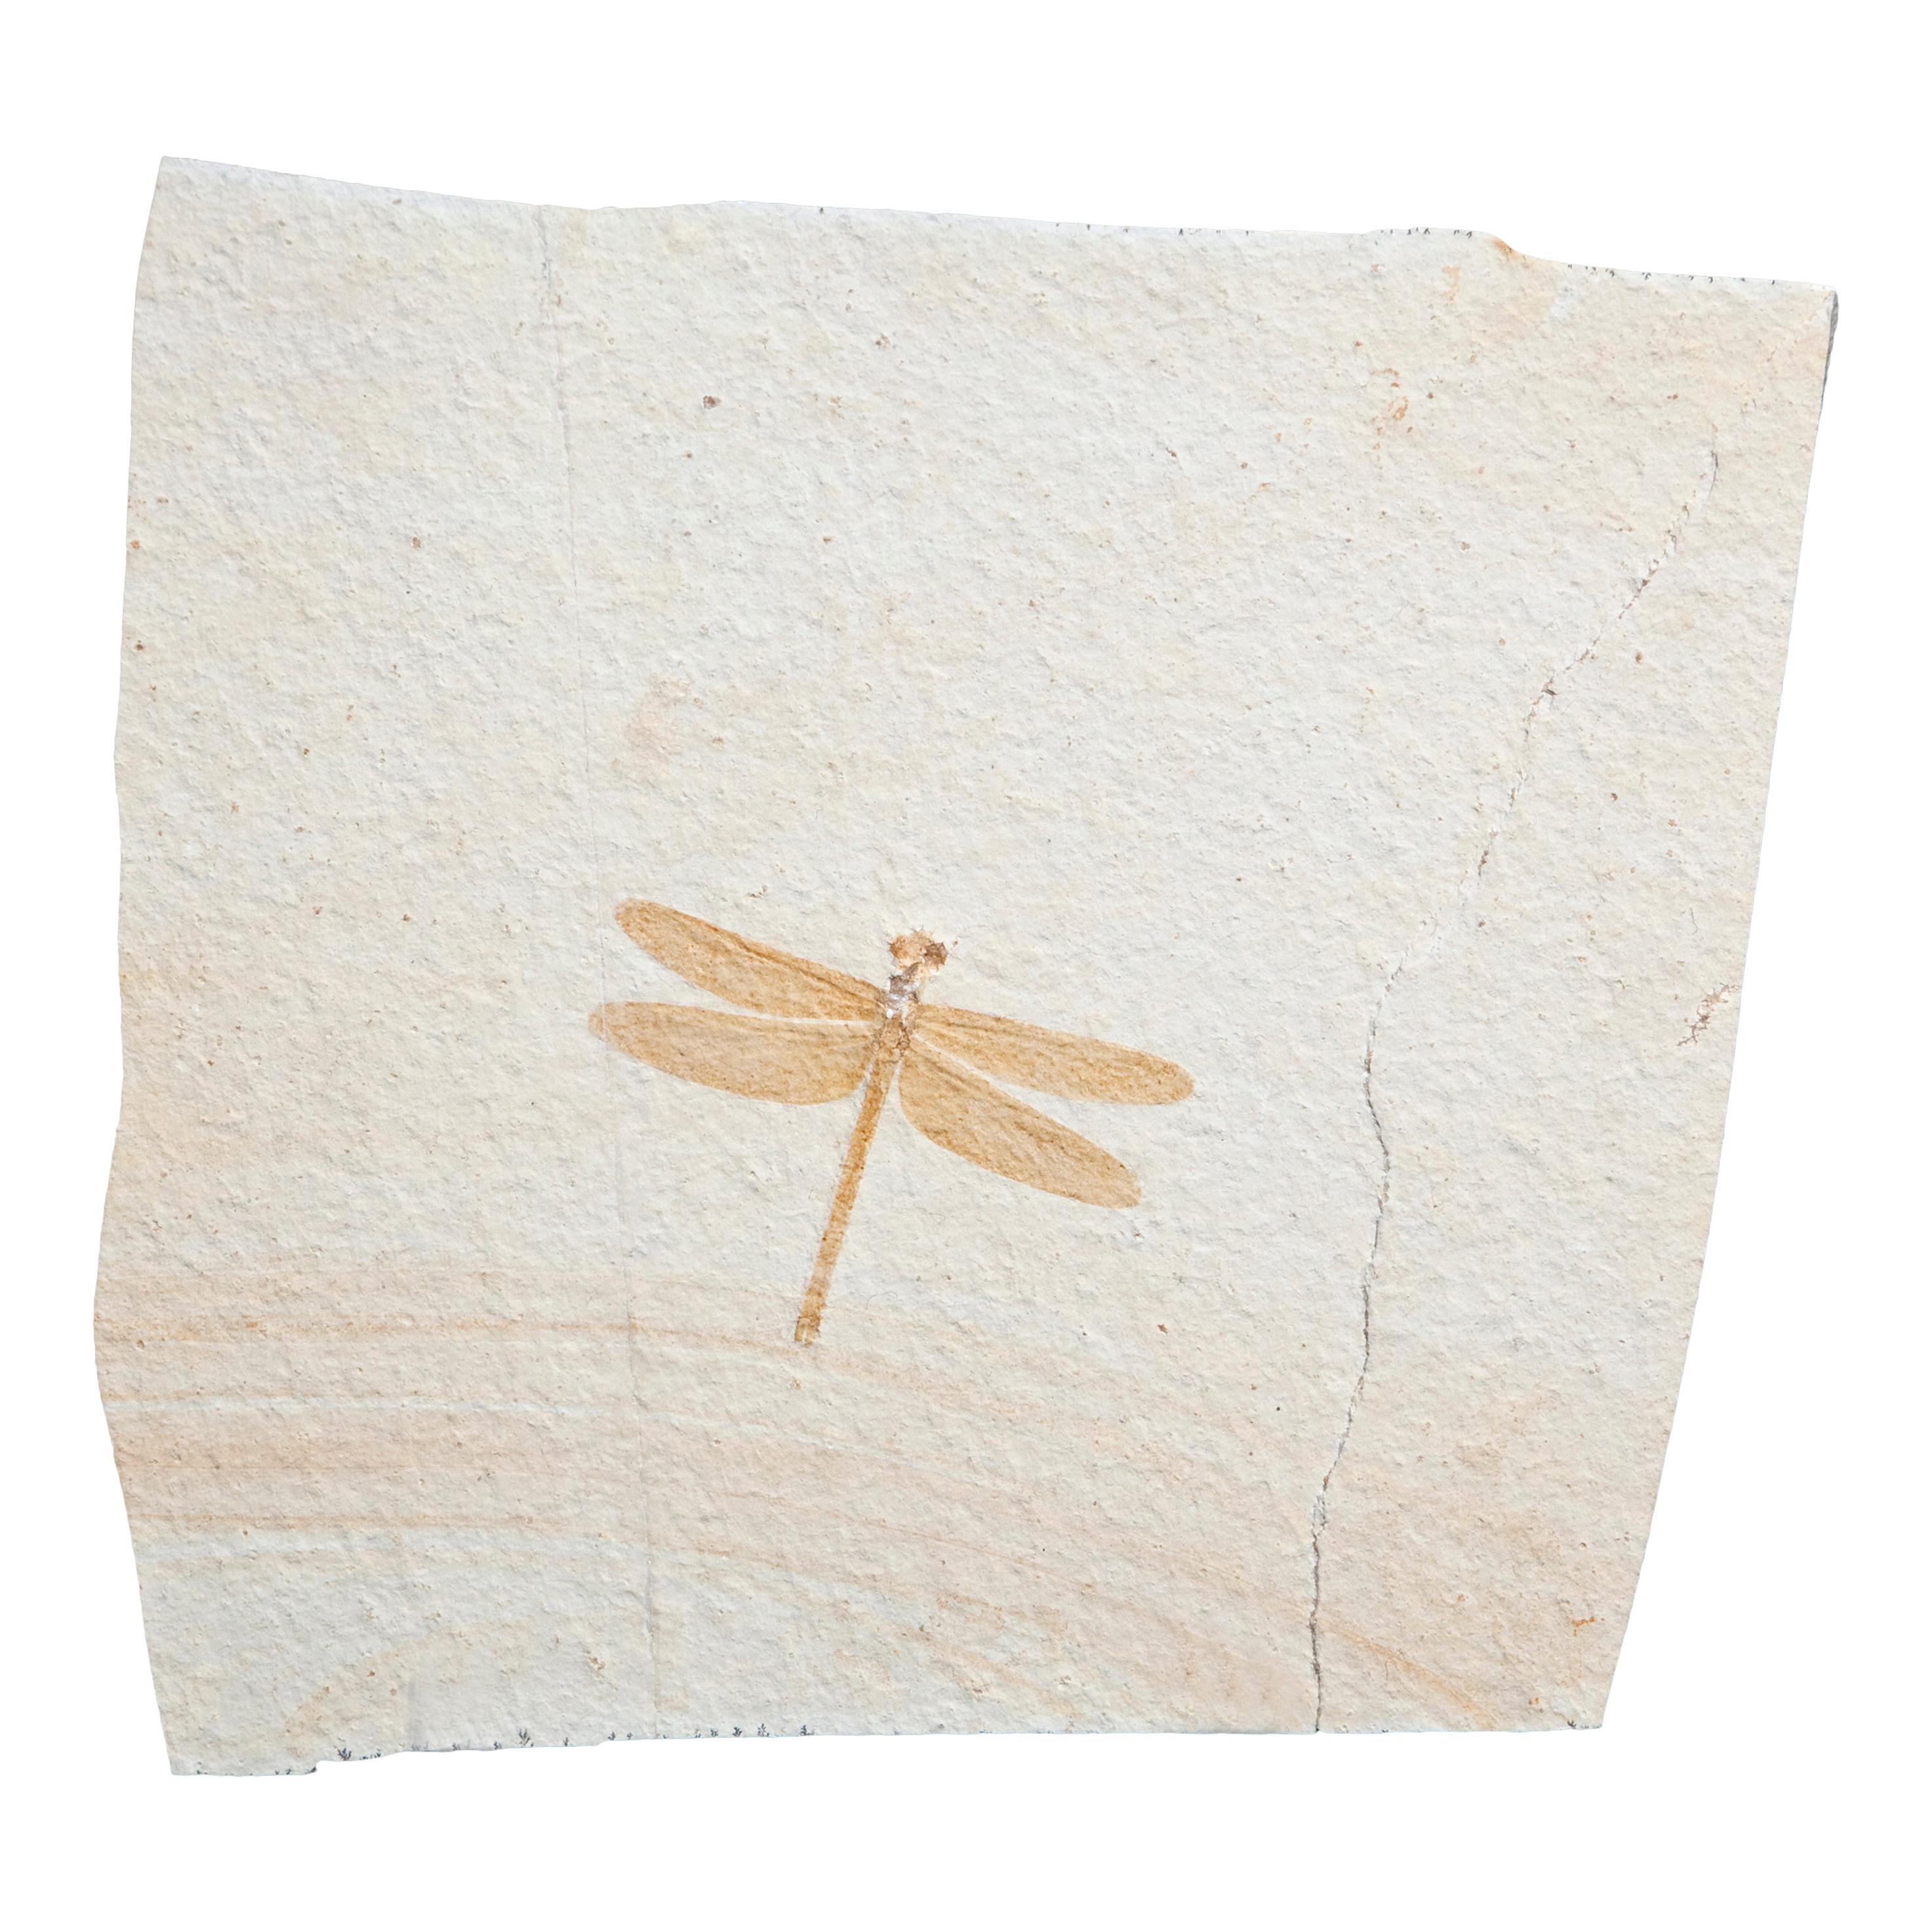 Fossil Dragonfly Dating 150 Million Years Old